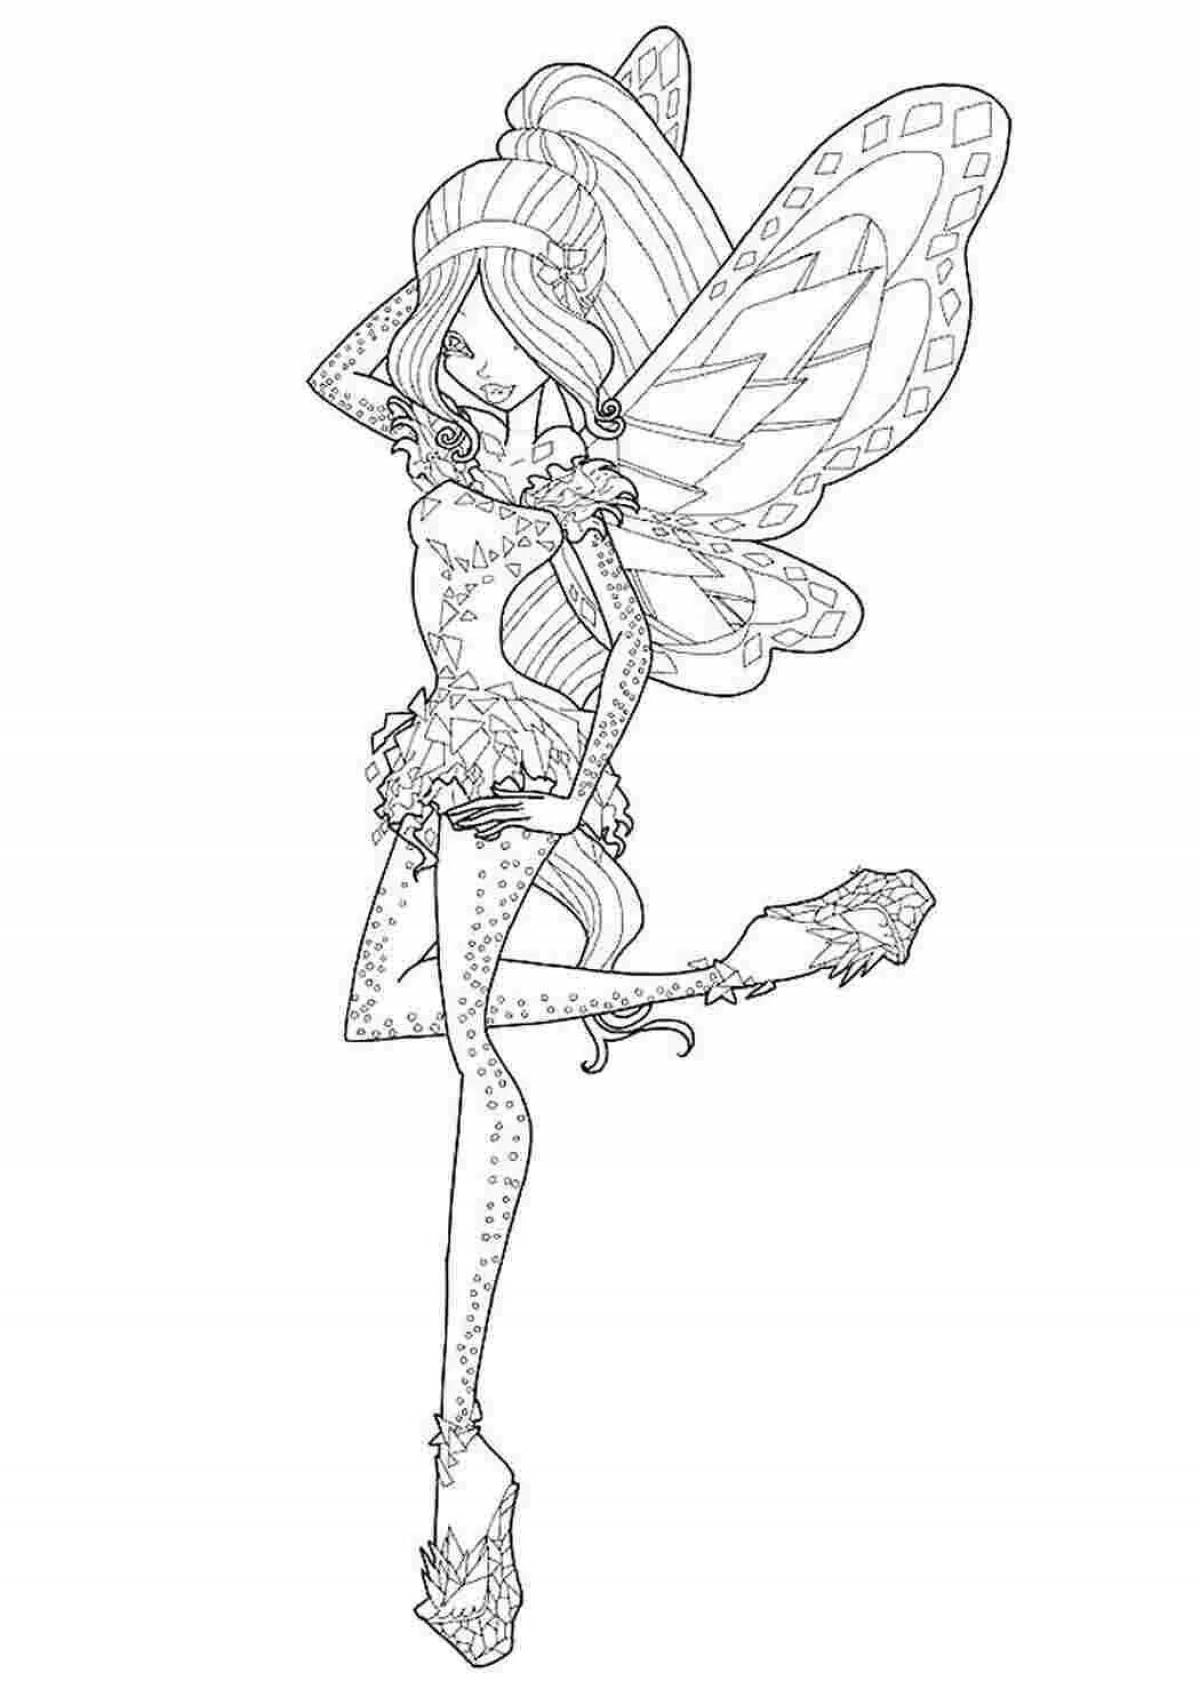 Outstanding tynix winx coloring page